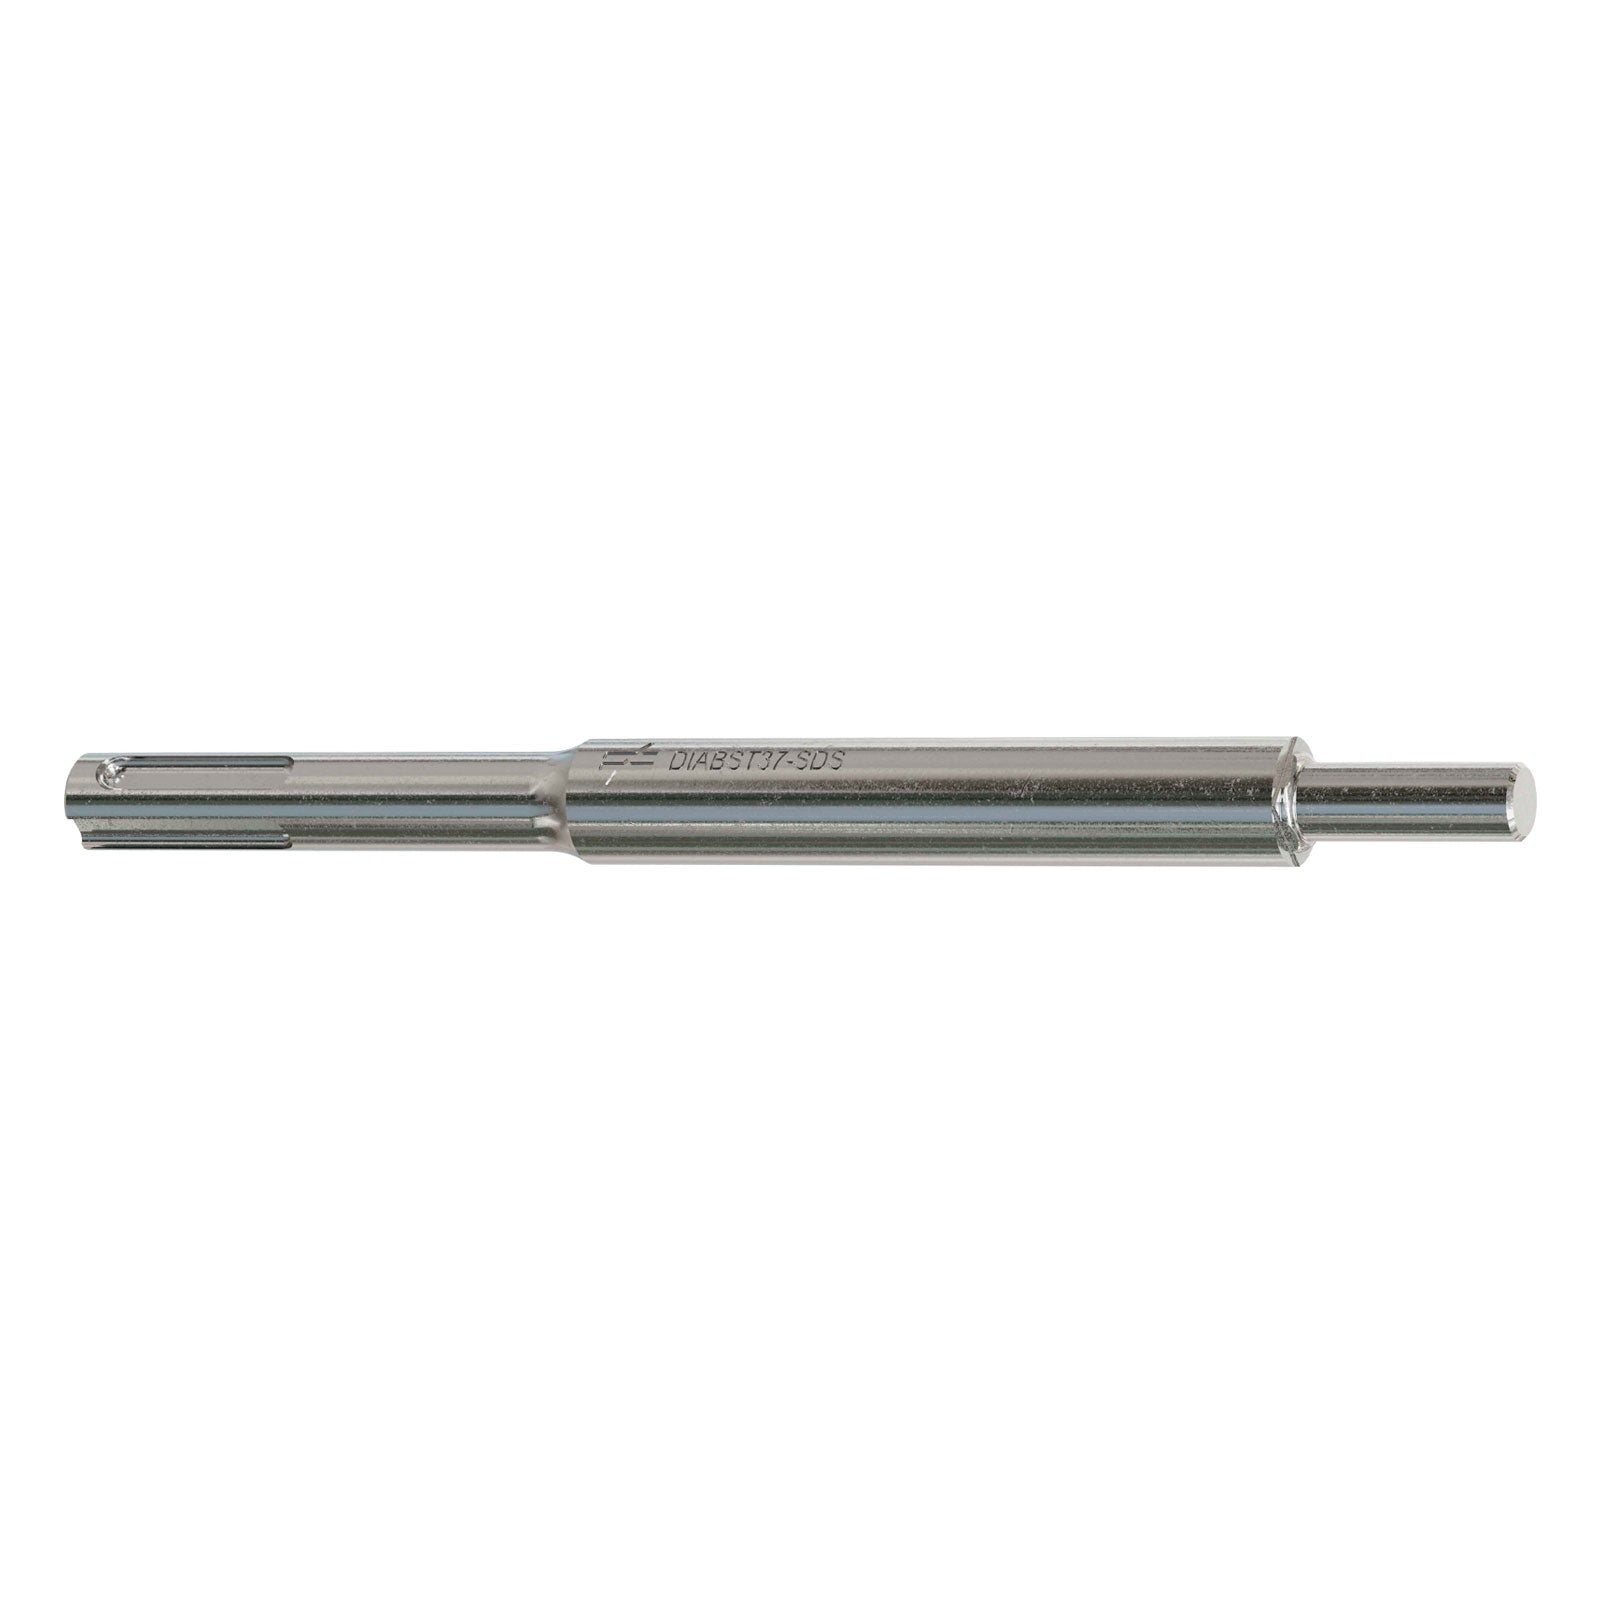 3/8" Strong-Tie Drop-In Internally Threaded Anchor Power Setting Tool - Pkg 1